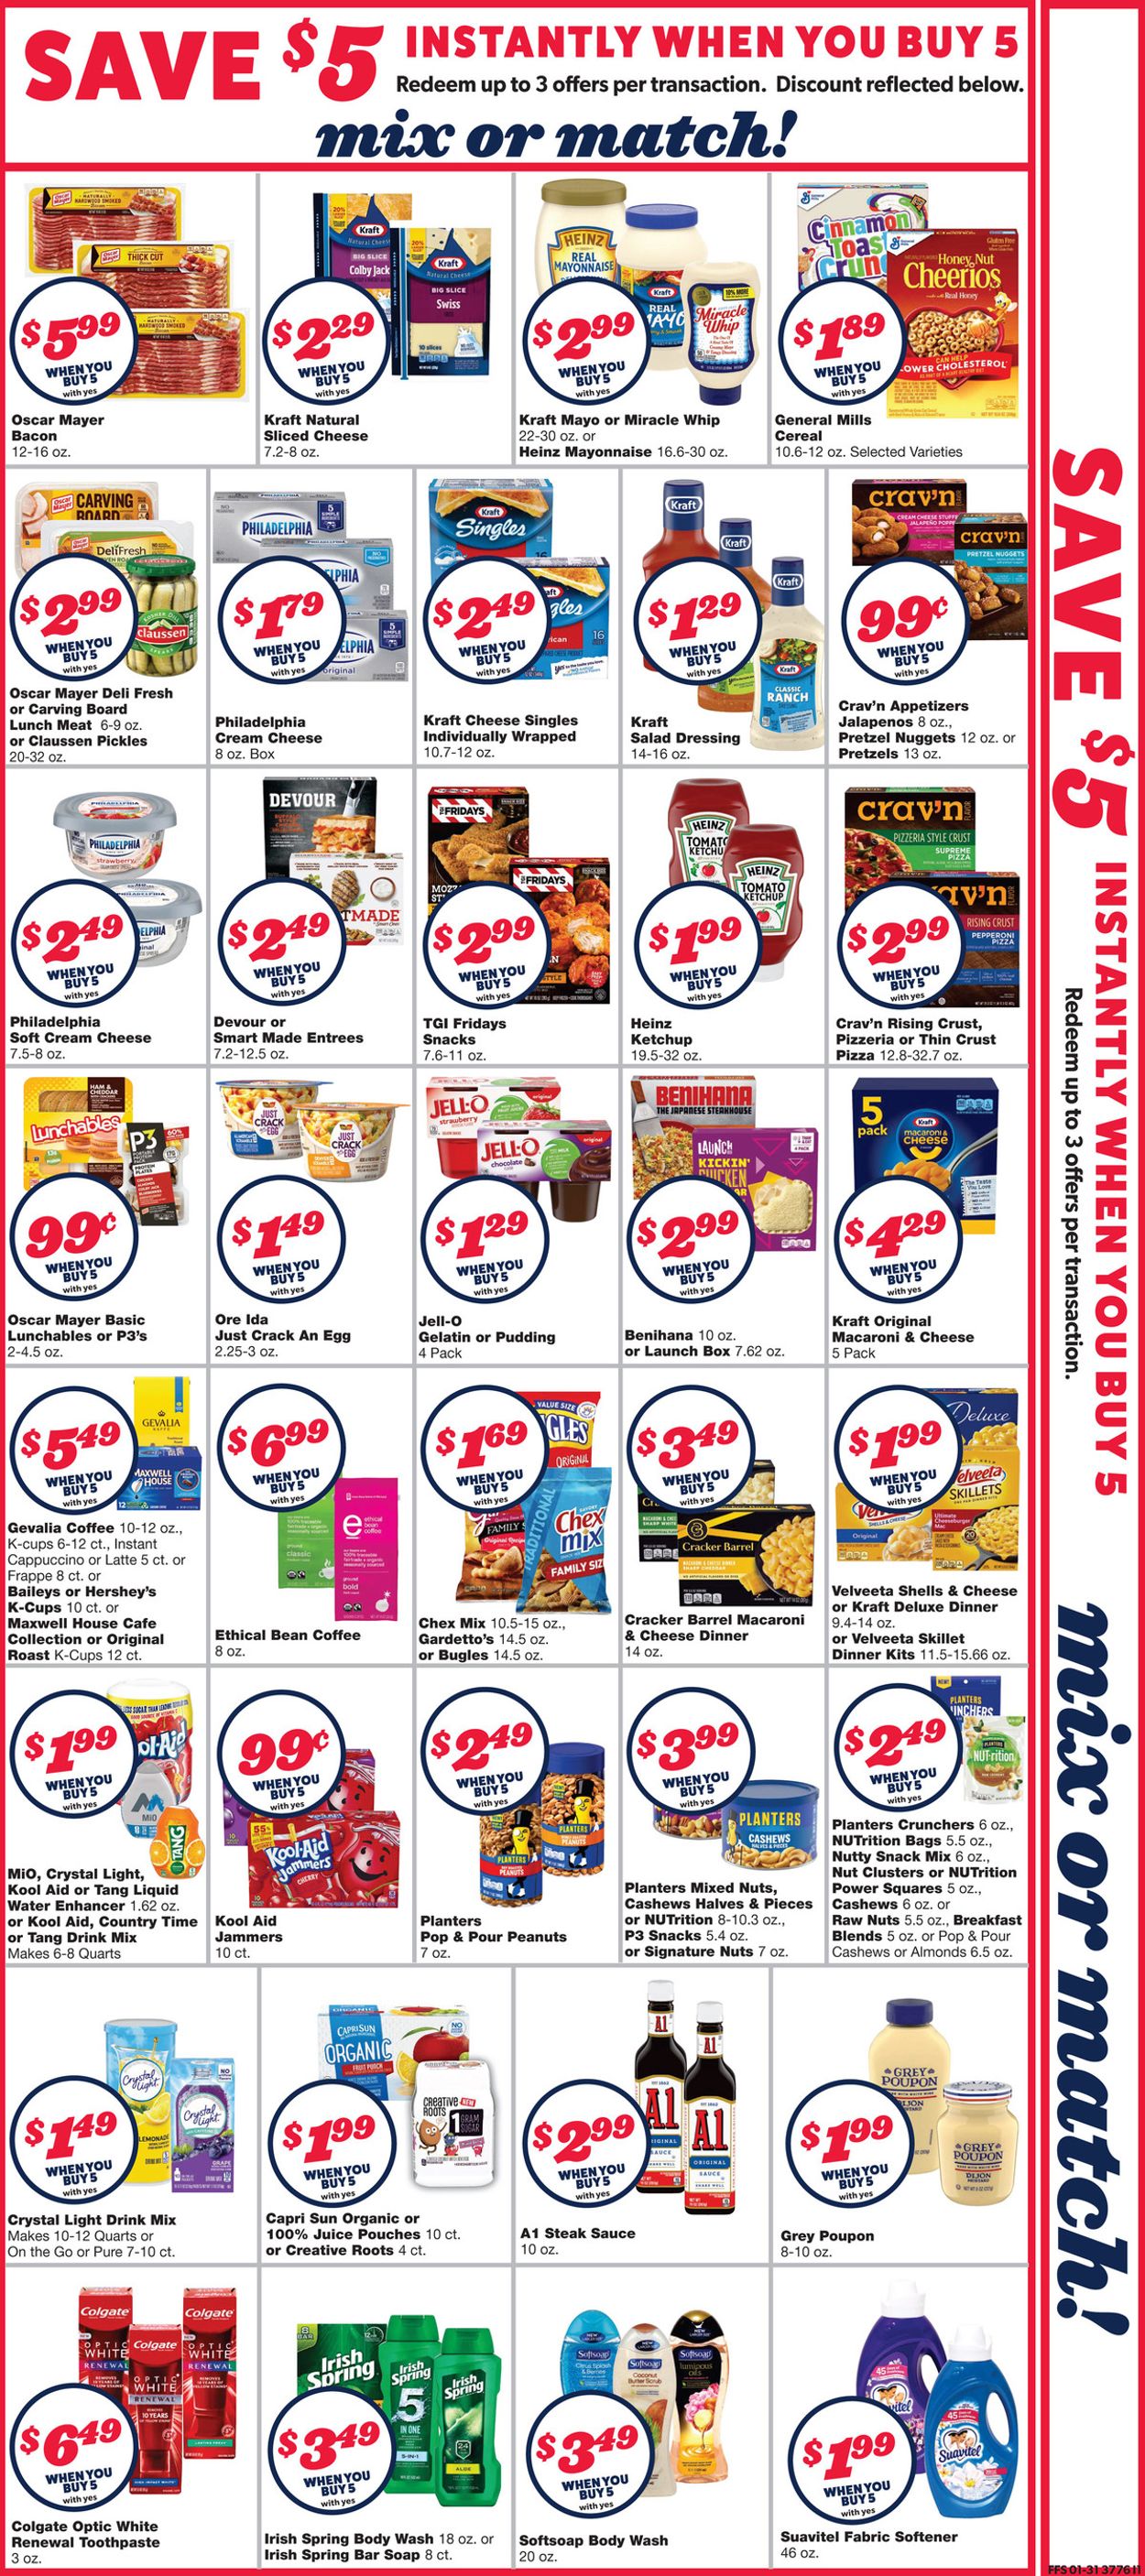 Family Fare Ad from 02/03/2021